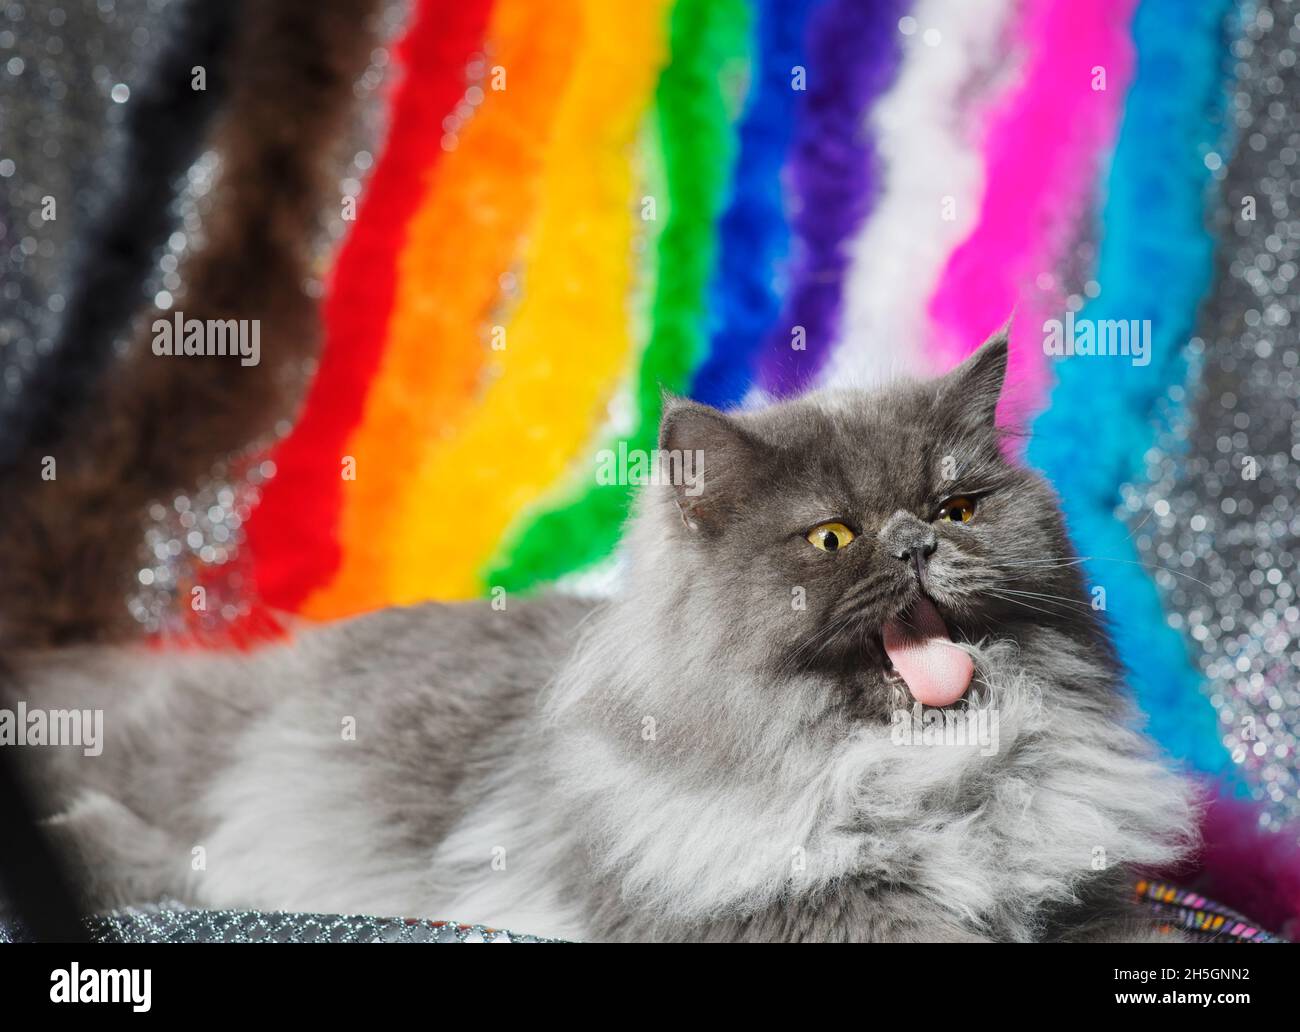 Grey cat with his mouth wide open and tongue sticking out, sitting with a rainbow of feather boas representing the inclusive pride flag. Stock Photo